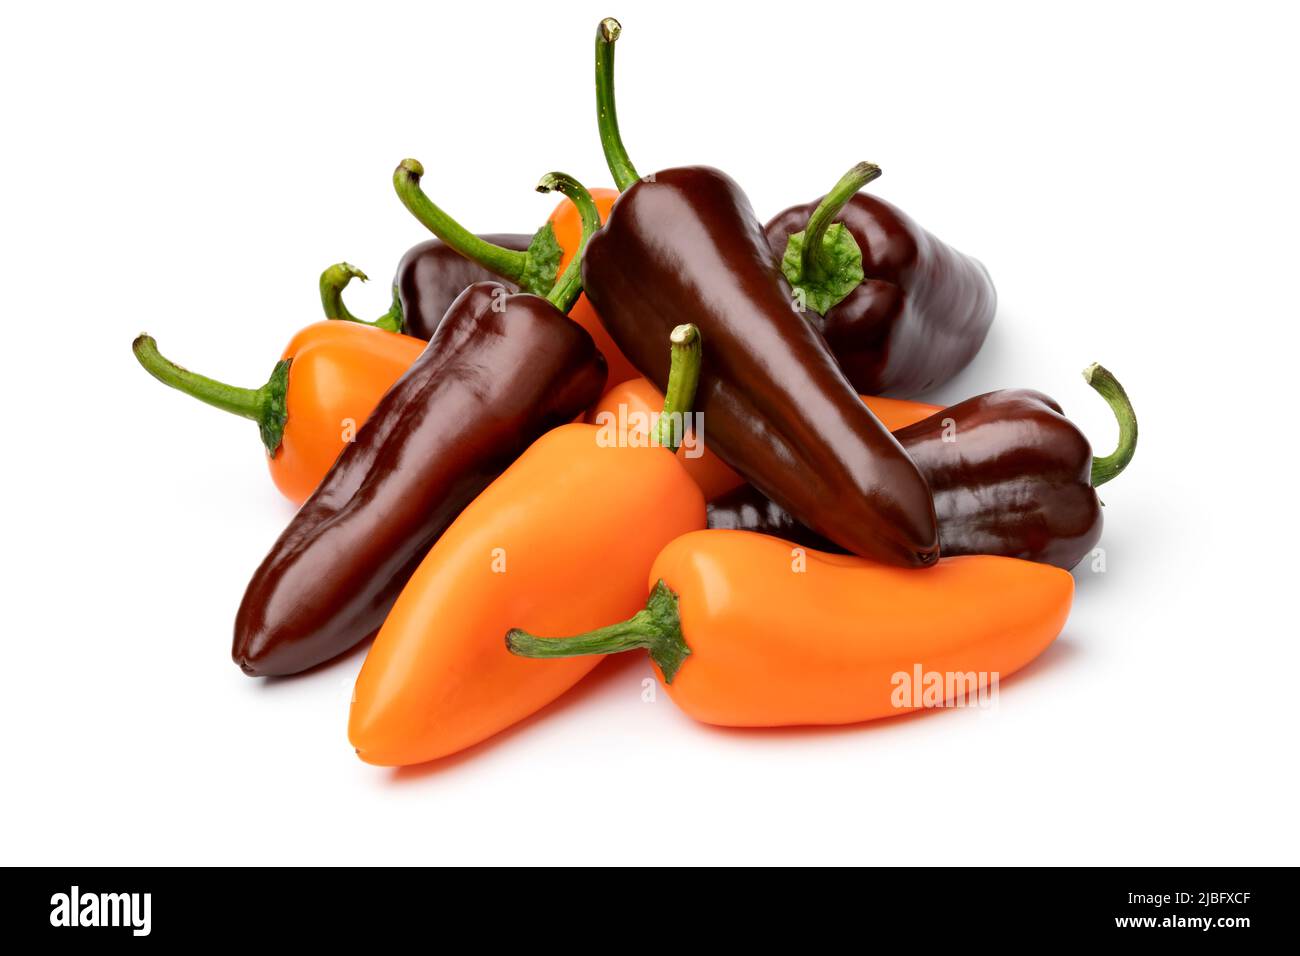 Heap of whole fresh orange and chocolate mini pointed bell peppers close up isolated on white background Stock Photo